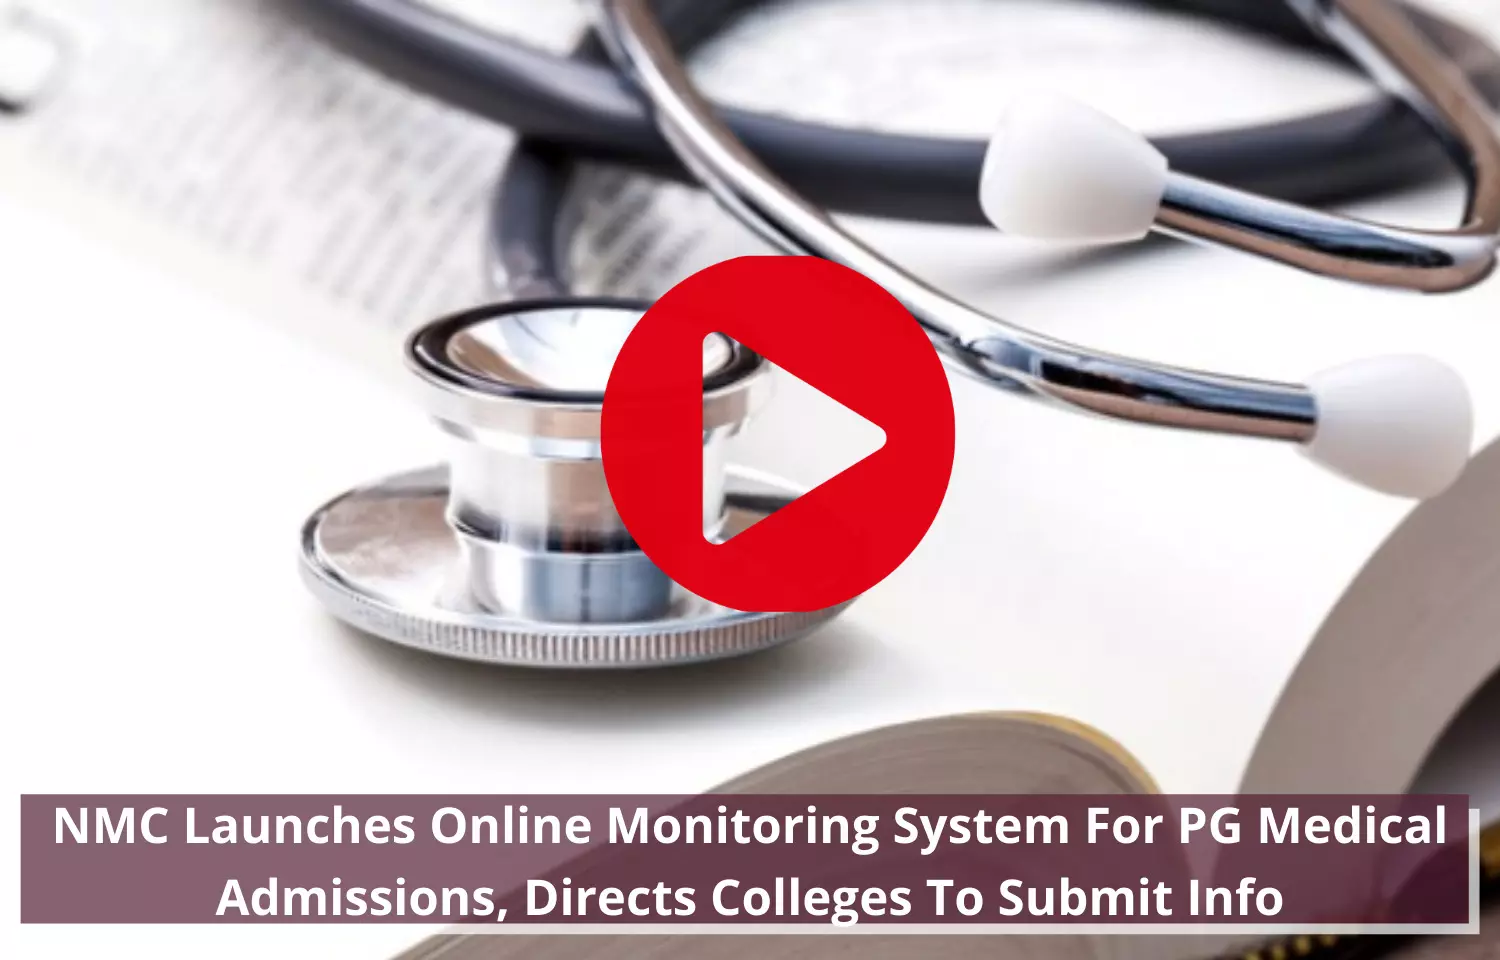 NMC unveils online monitoring system for PG medical admissions